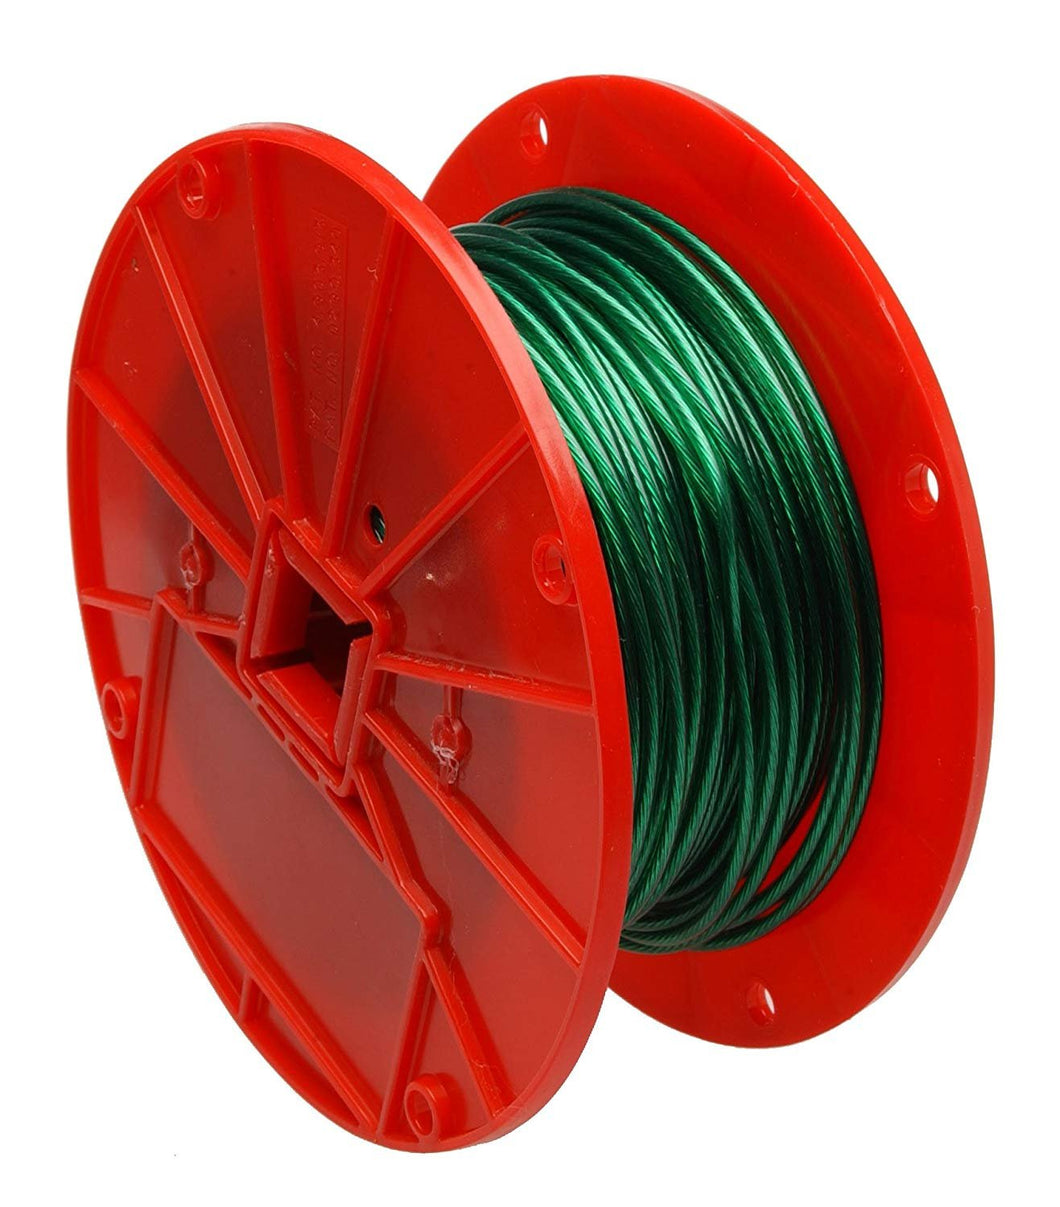 Galvanized Steel Wire Rope on Reel, Vinyl Coated, 1x7 Strand, Green, 1/16